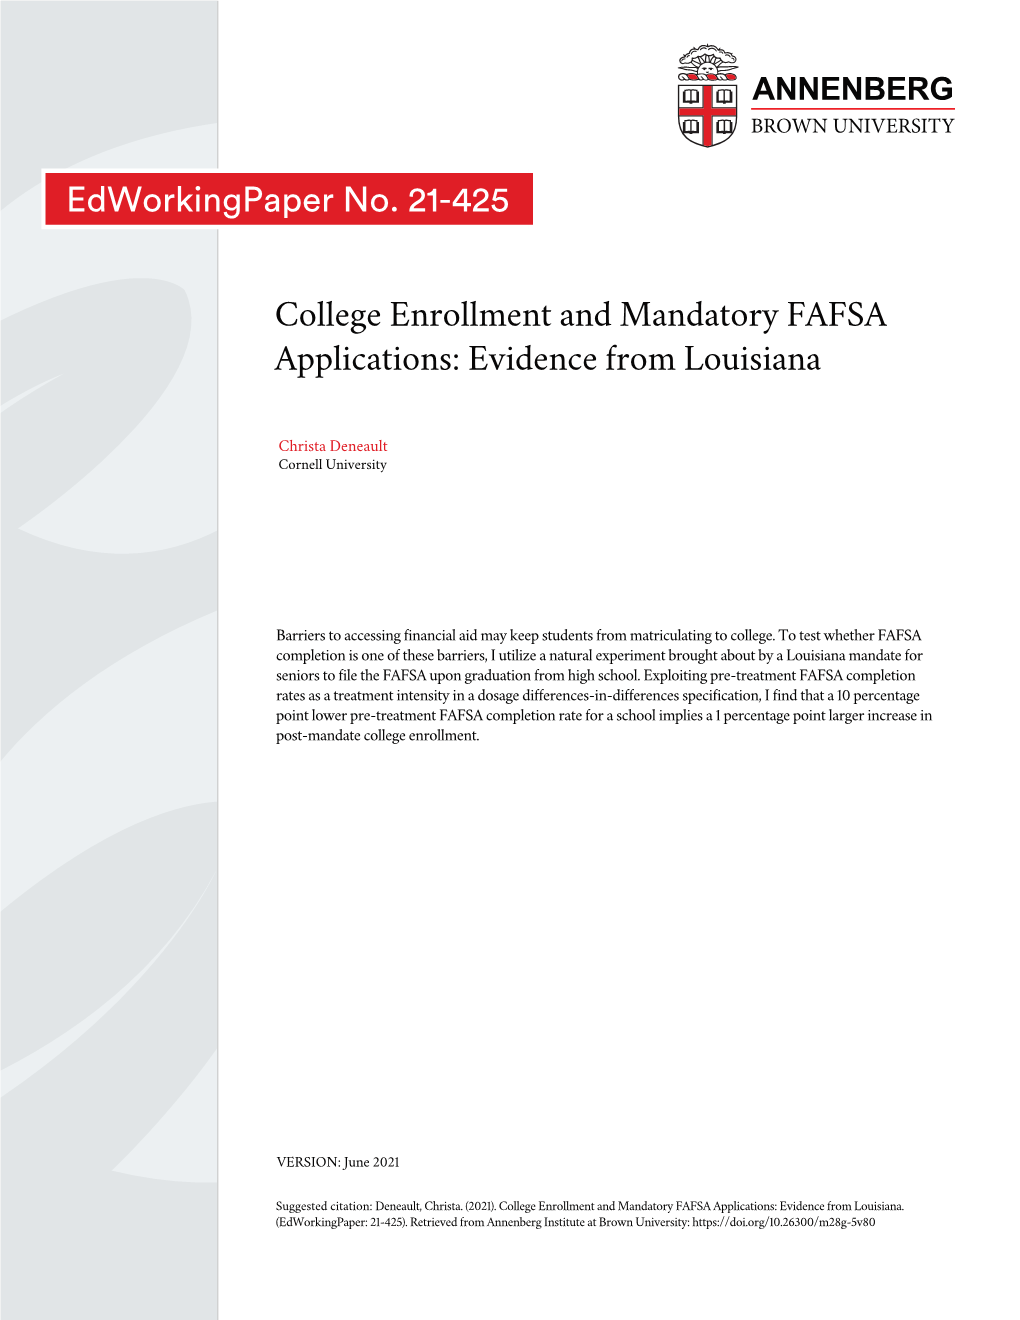 College Enrollment and Mandatory FAFSA Applications: Evidence from Louisiana